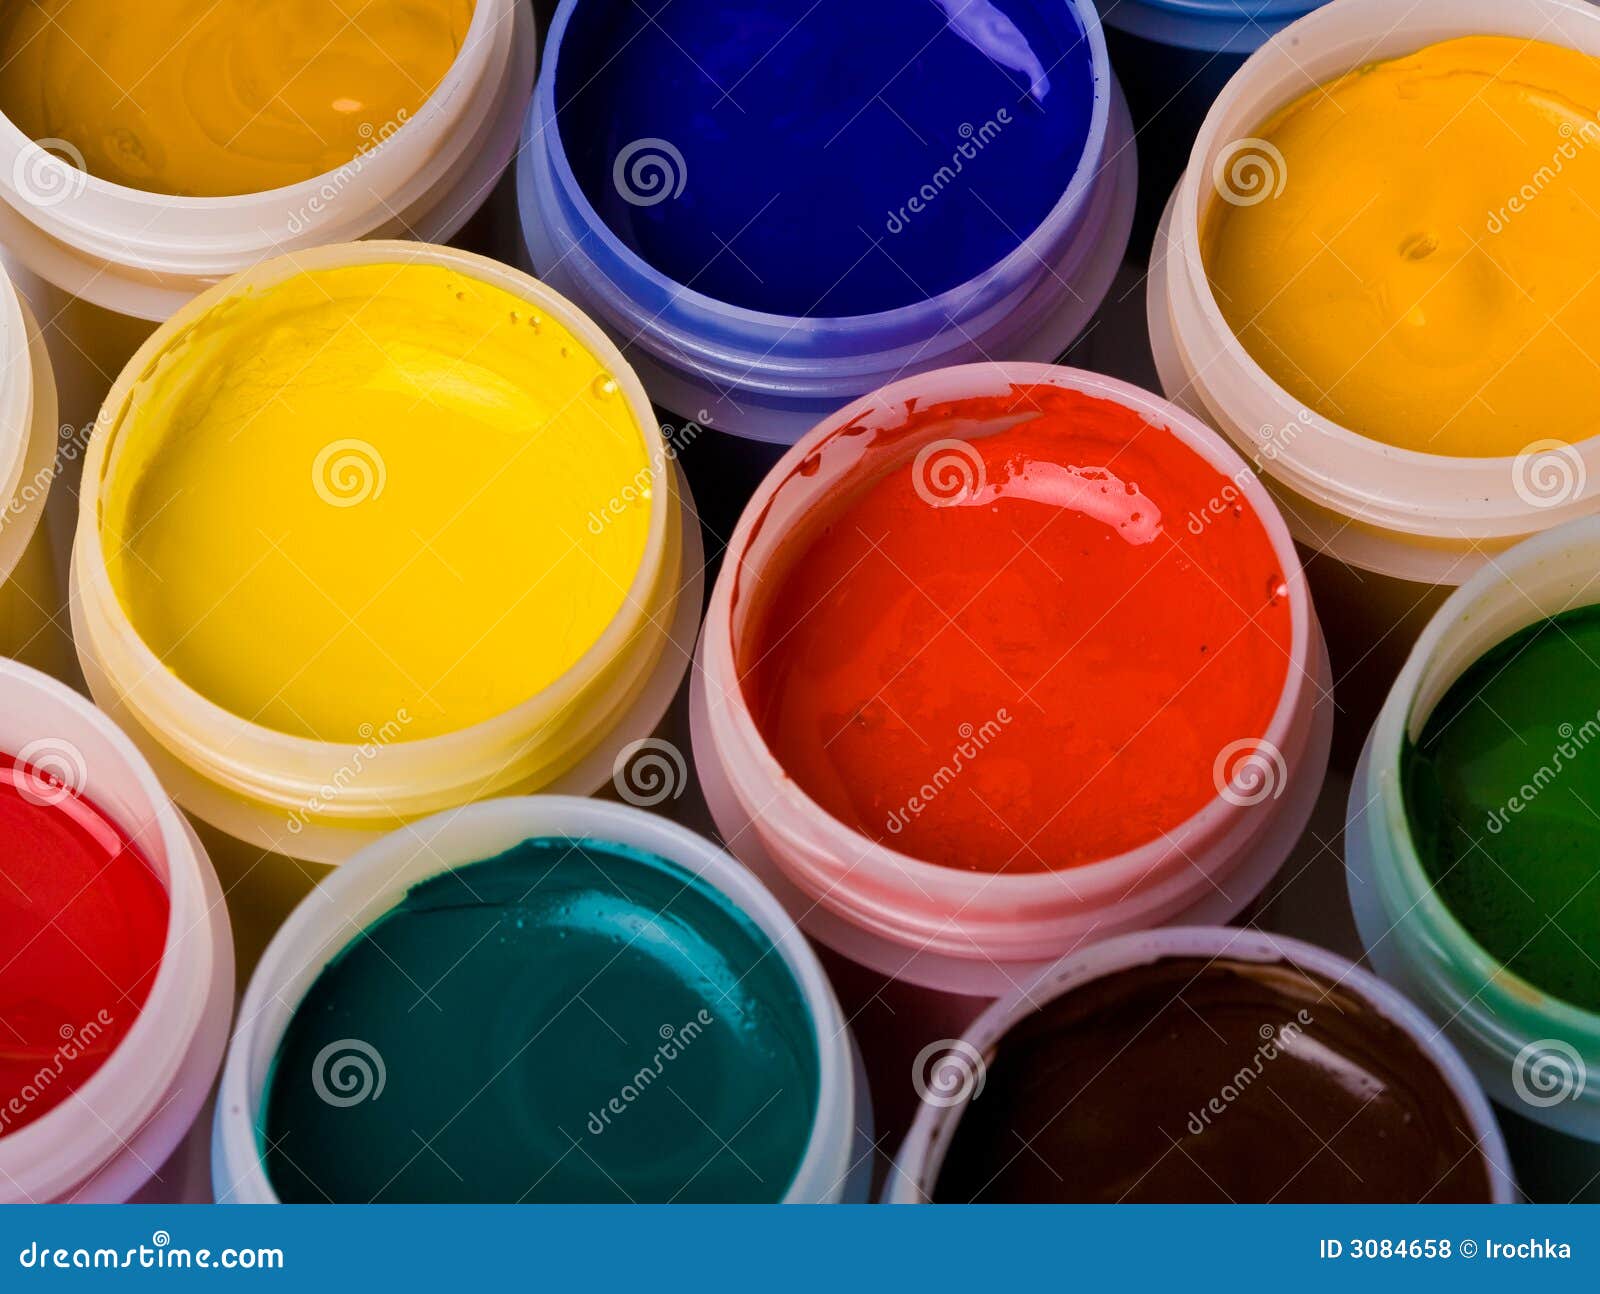 Plastic Paint Bottles For Art Stock Photo, Picture and Royalty Free Image.  Image 141872771.